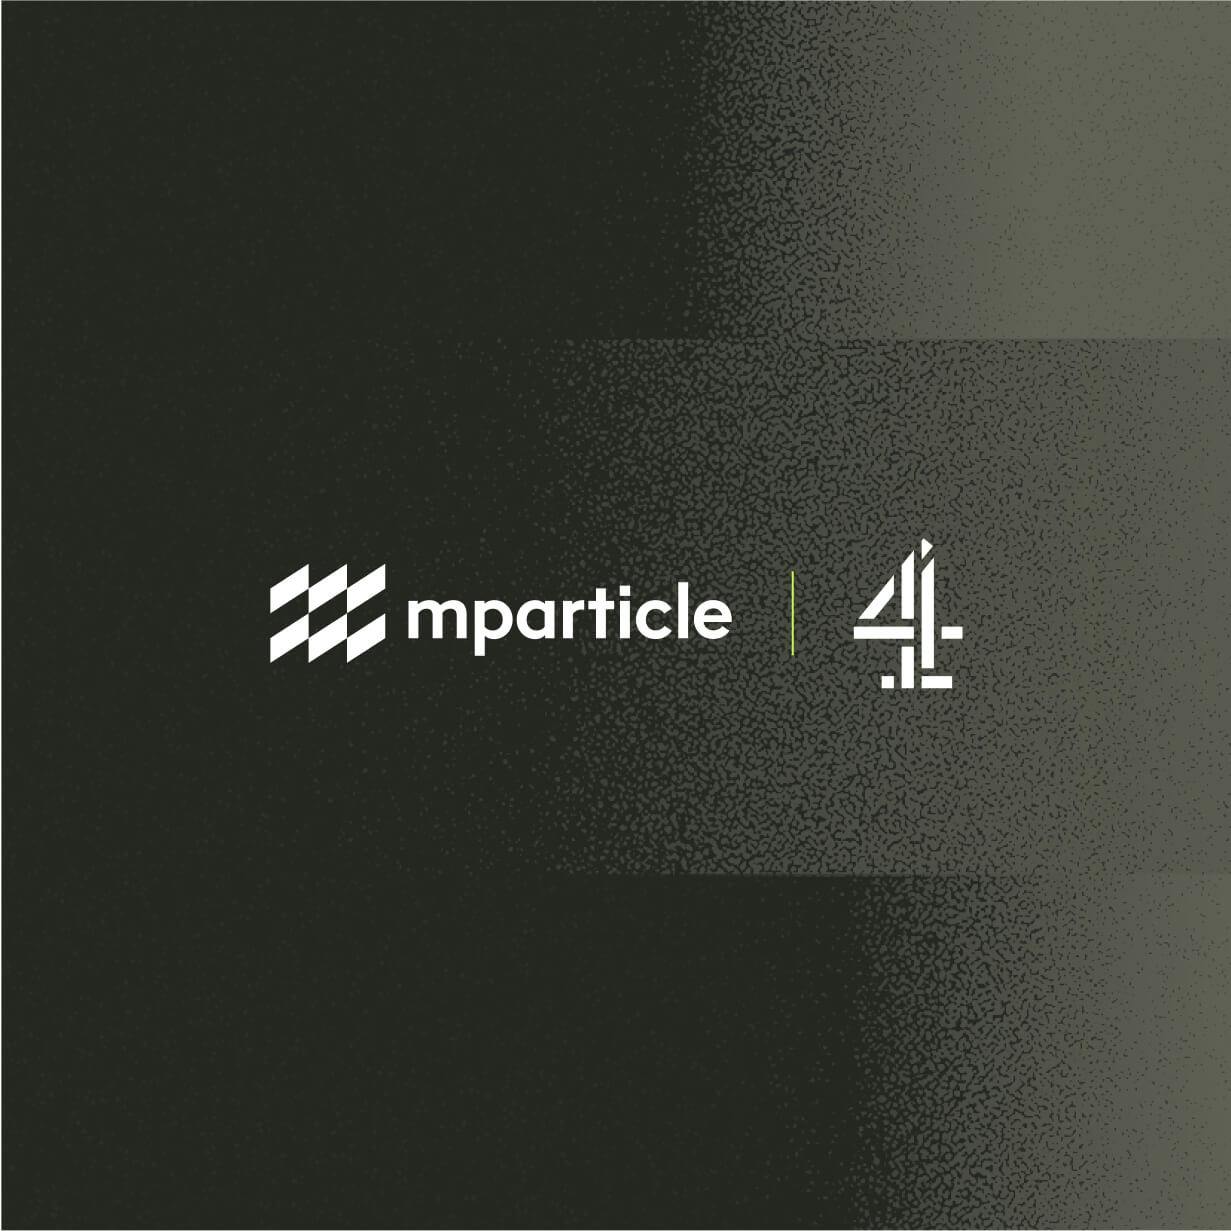 Channel 4 selects mParticle to accelerate digital growth